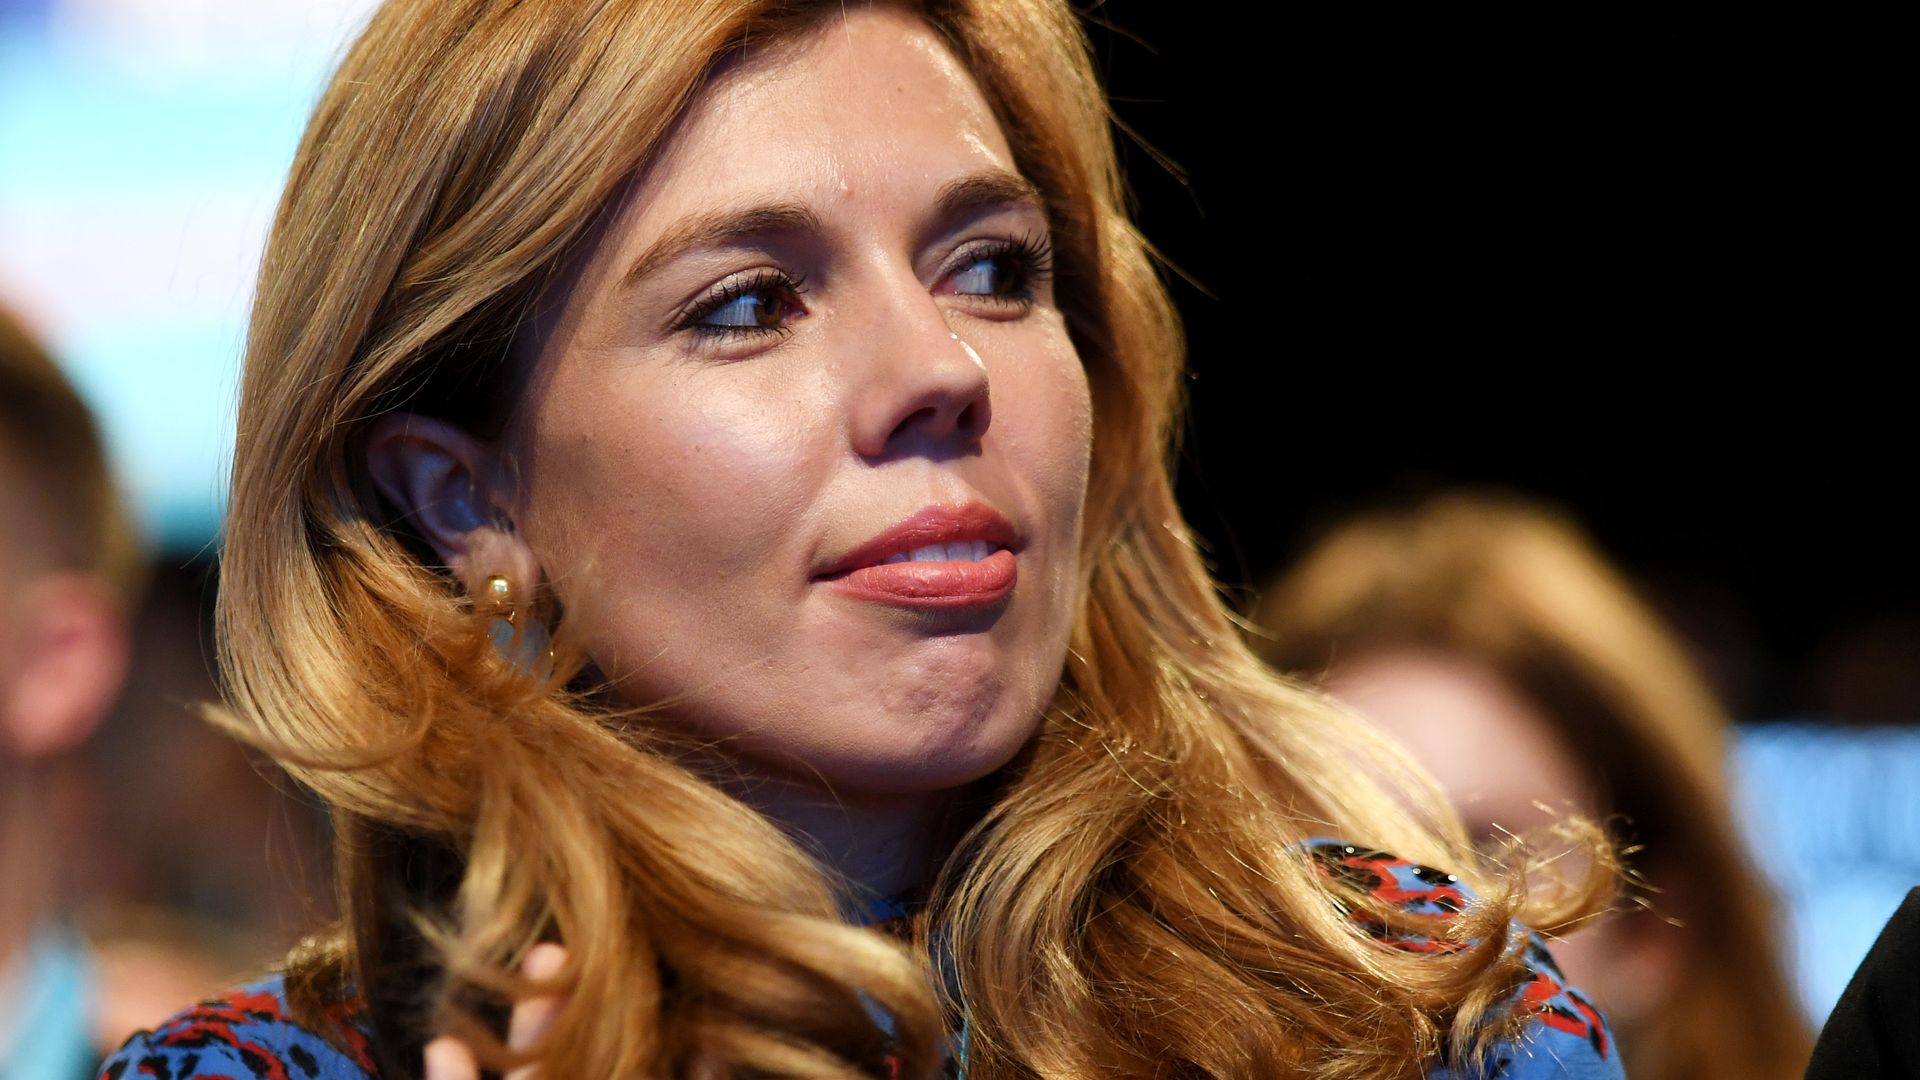 Carrie Symonds at the Tory Party Conference.
Conservative Party Conference, Manchester, UK - 30 Sep 2019